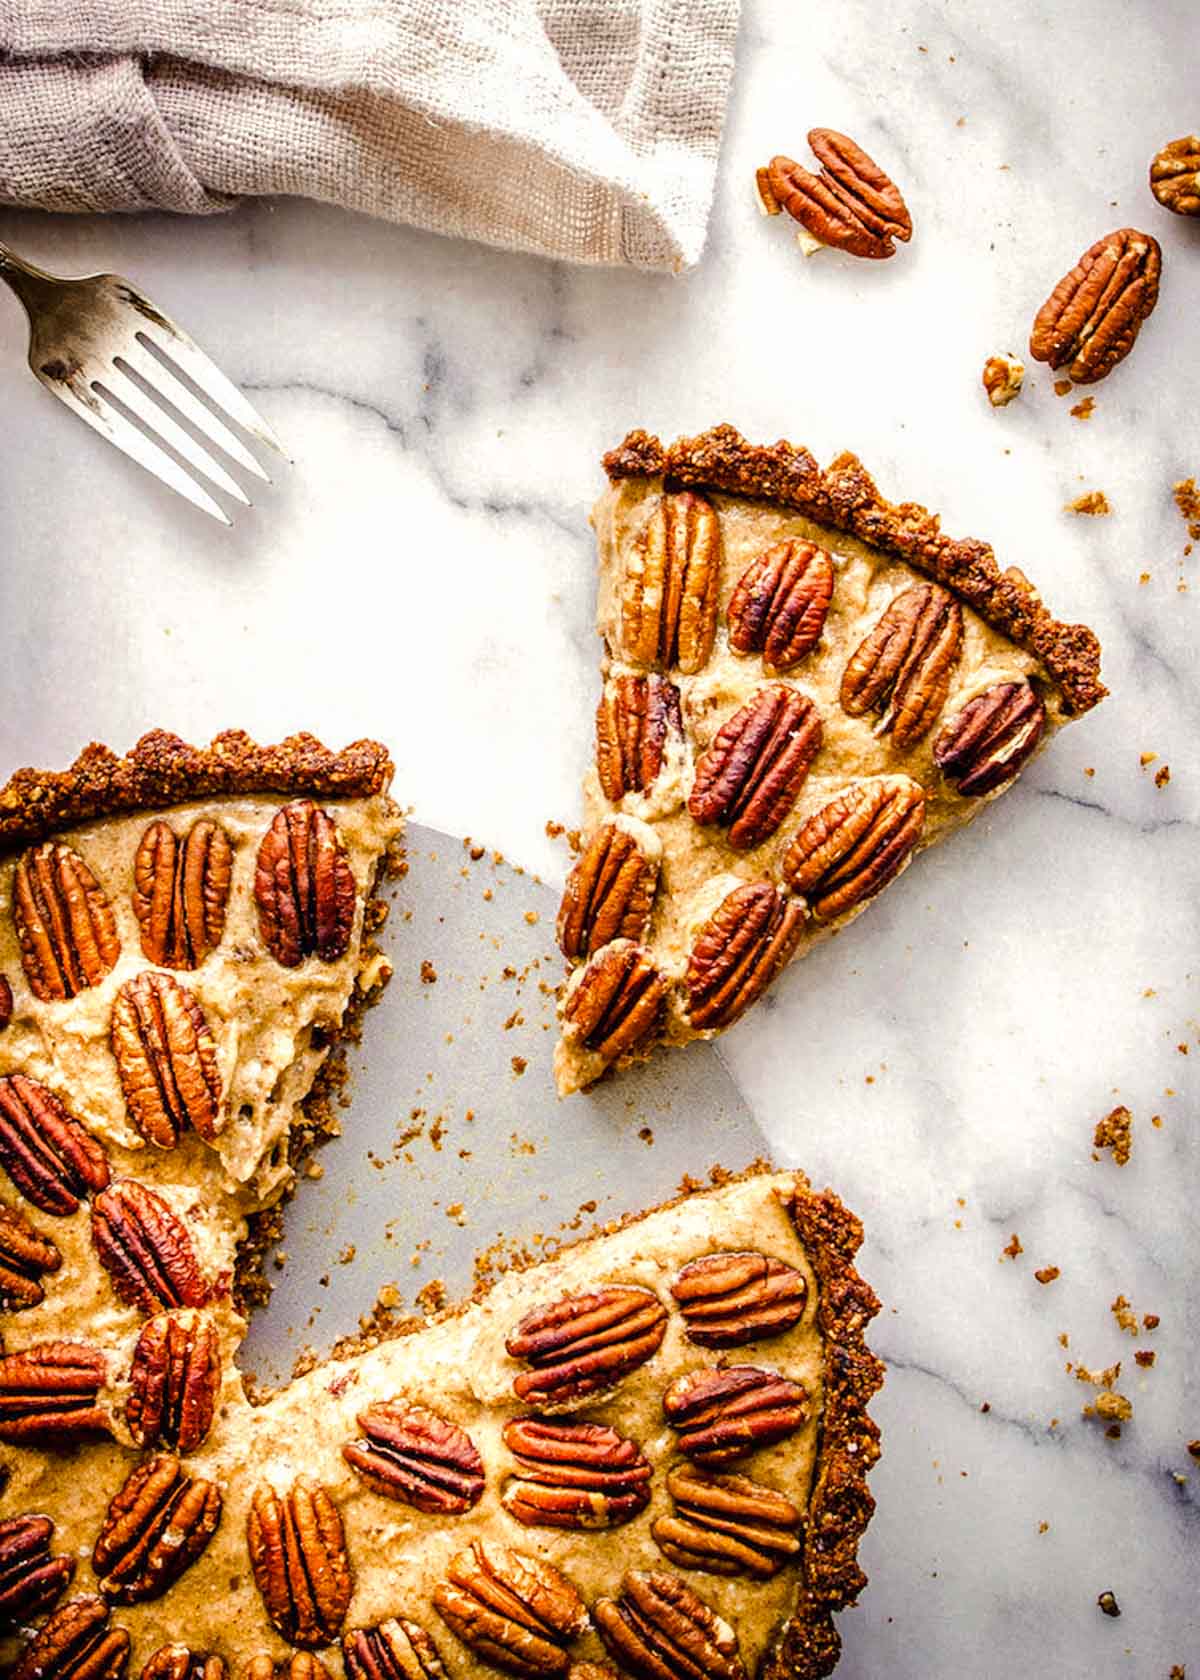 A vegan gluten free pecan pie sits on a marble counter with a slice taken out. A fork and napkin sit nearby.